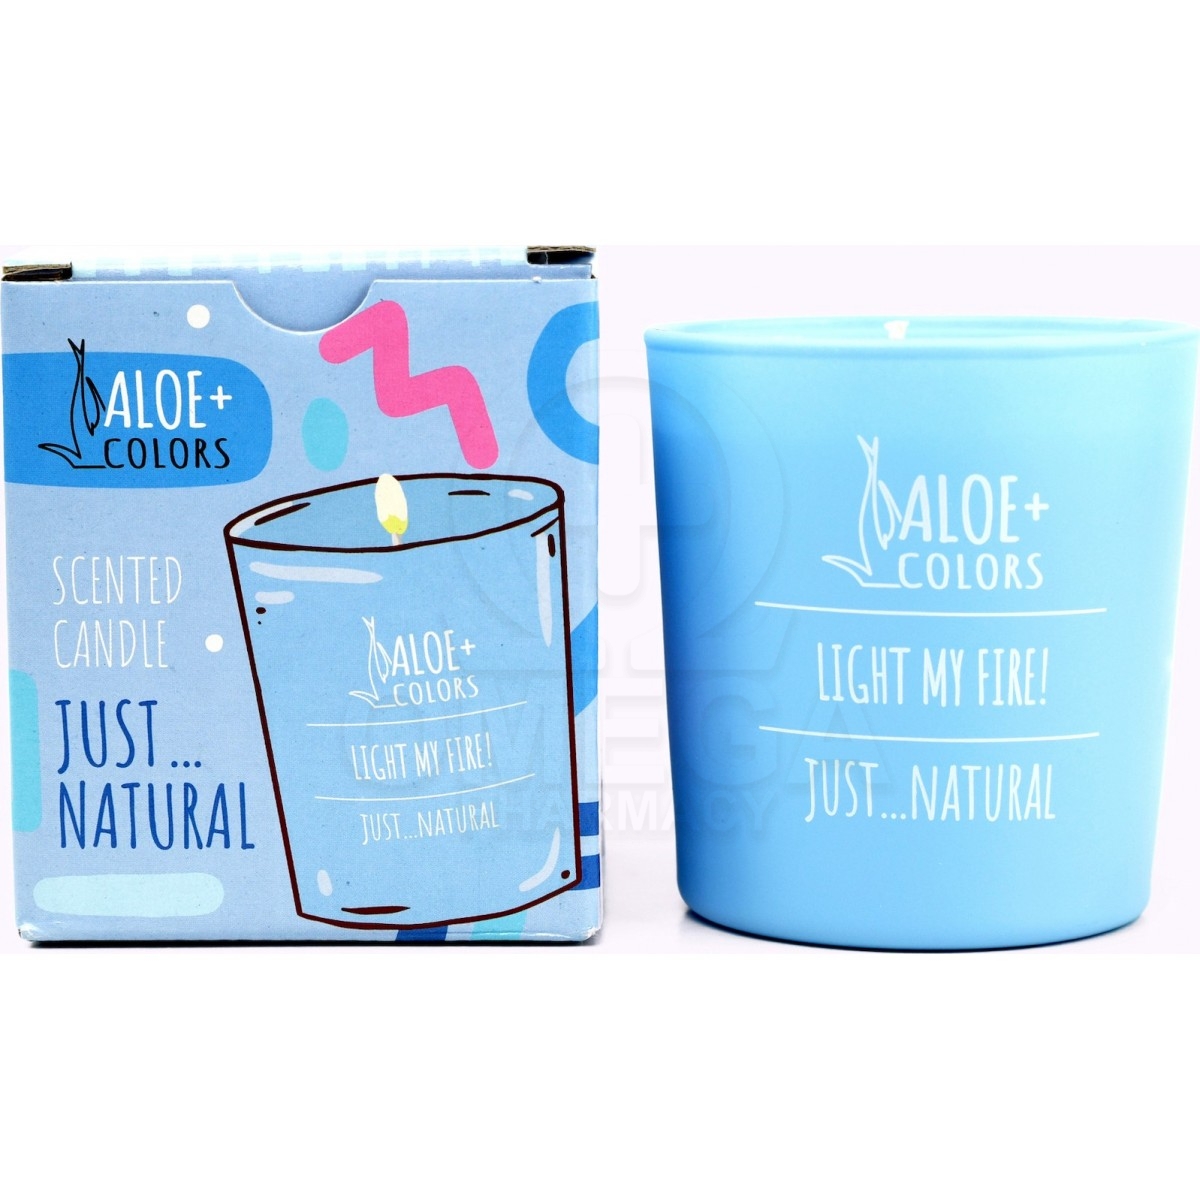 ALOE+ COLORS Just Natural Scented Soy Candle Κερί Σόγιας με Άρωμα  Φρεσκάδας, 220gr